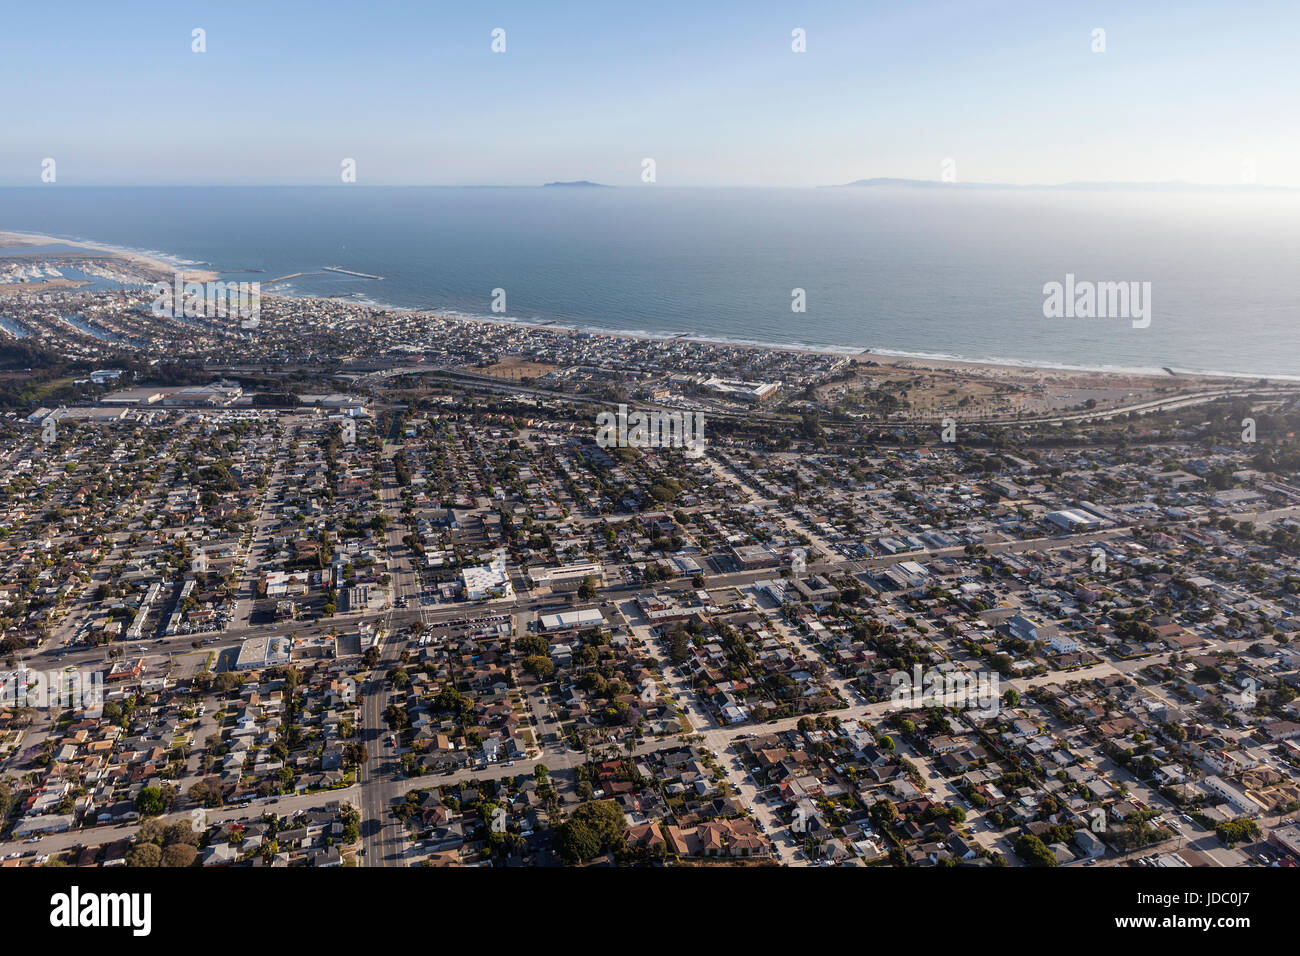 Aerial view of the Ventura County coast in Southern California. Stock Photo